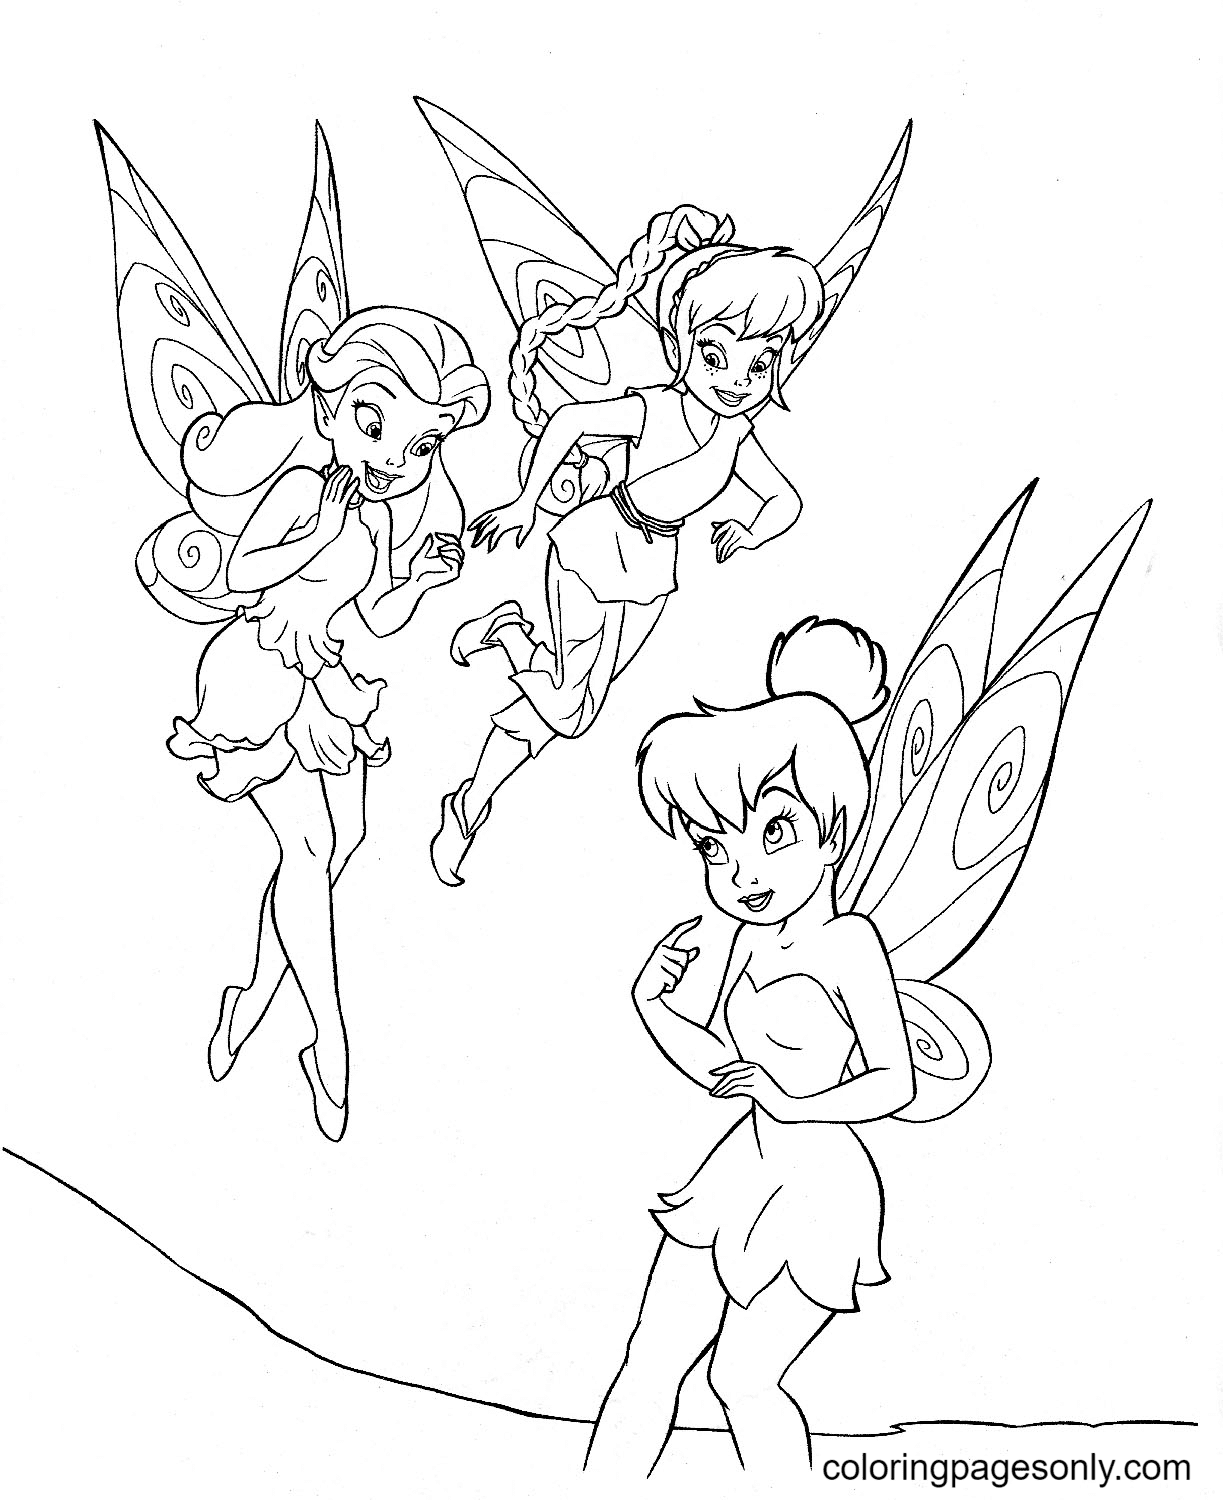 disney fairies coloring pages rosetta